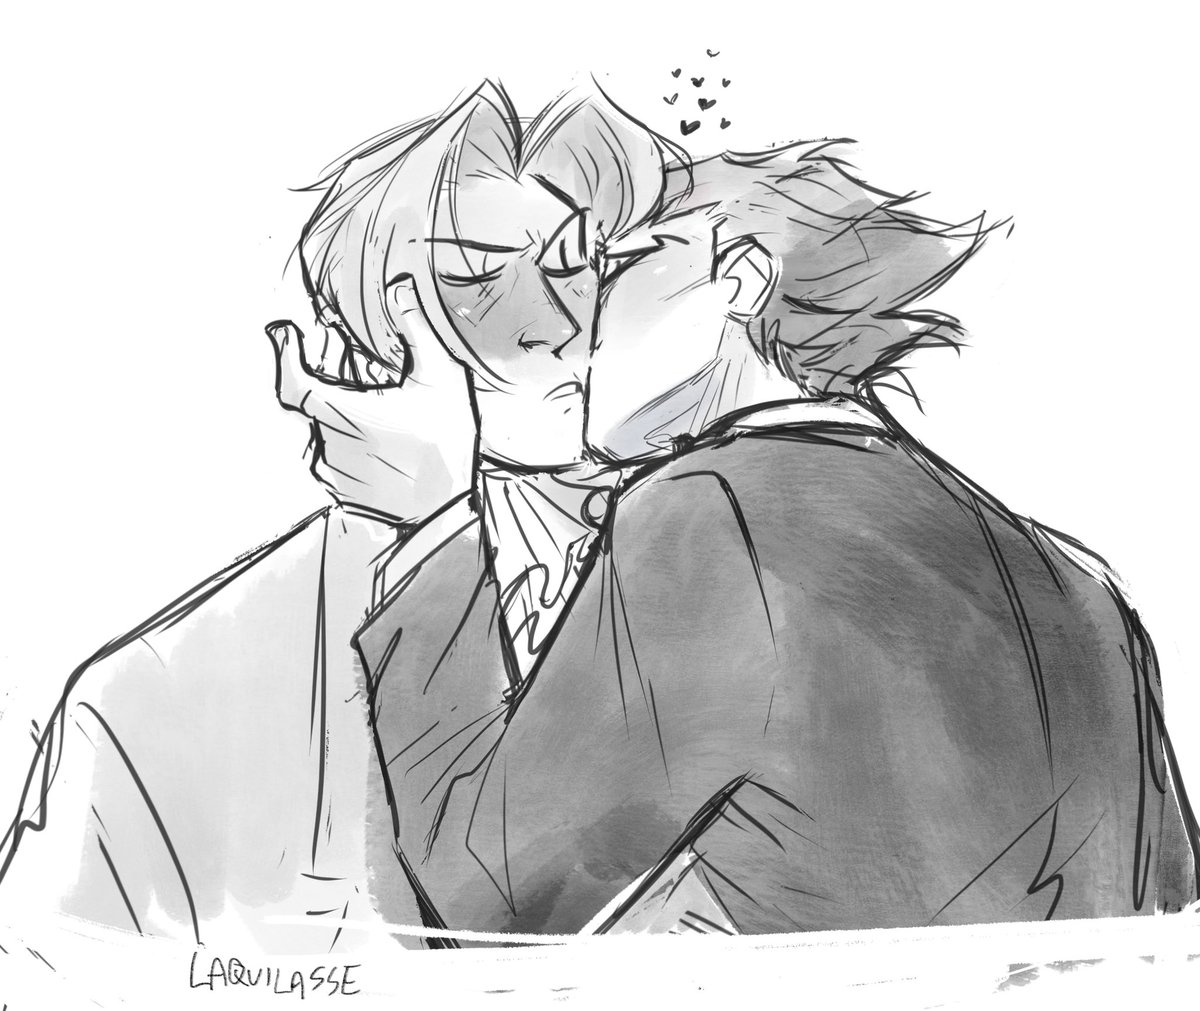 Day 3, it's THEIR DAY ? just thought I'd post some soft kissy sketches for official narumitsu day ? #nmweek20 